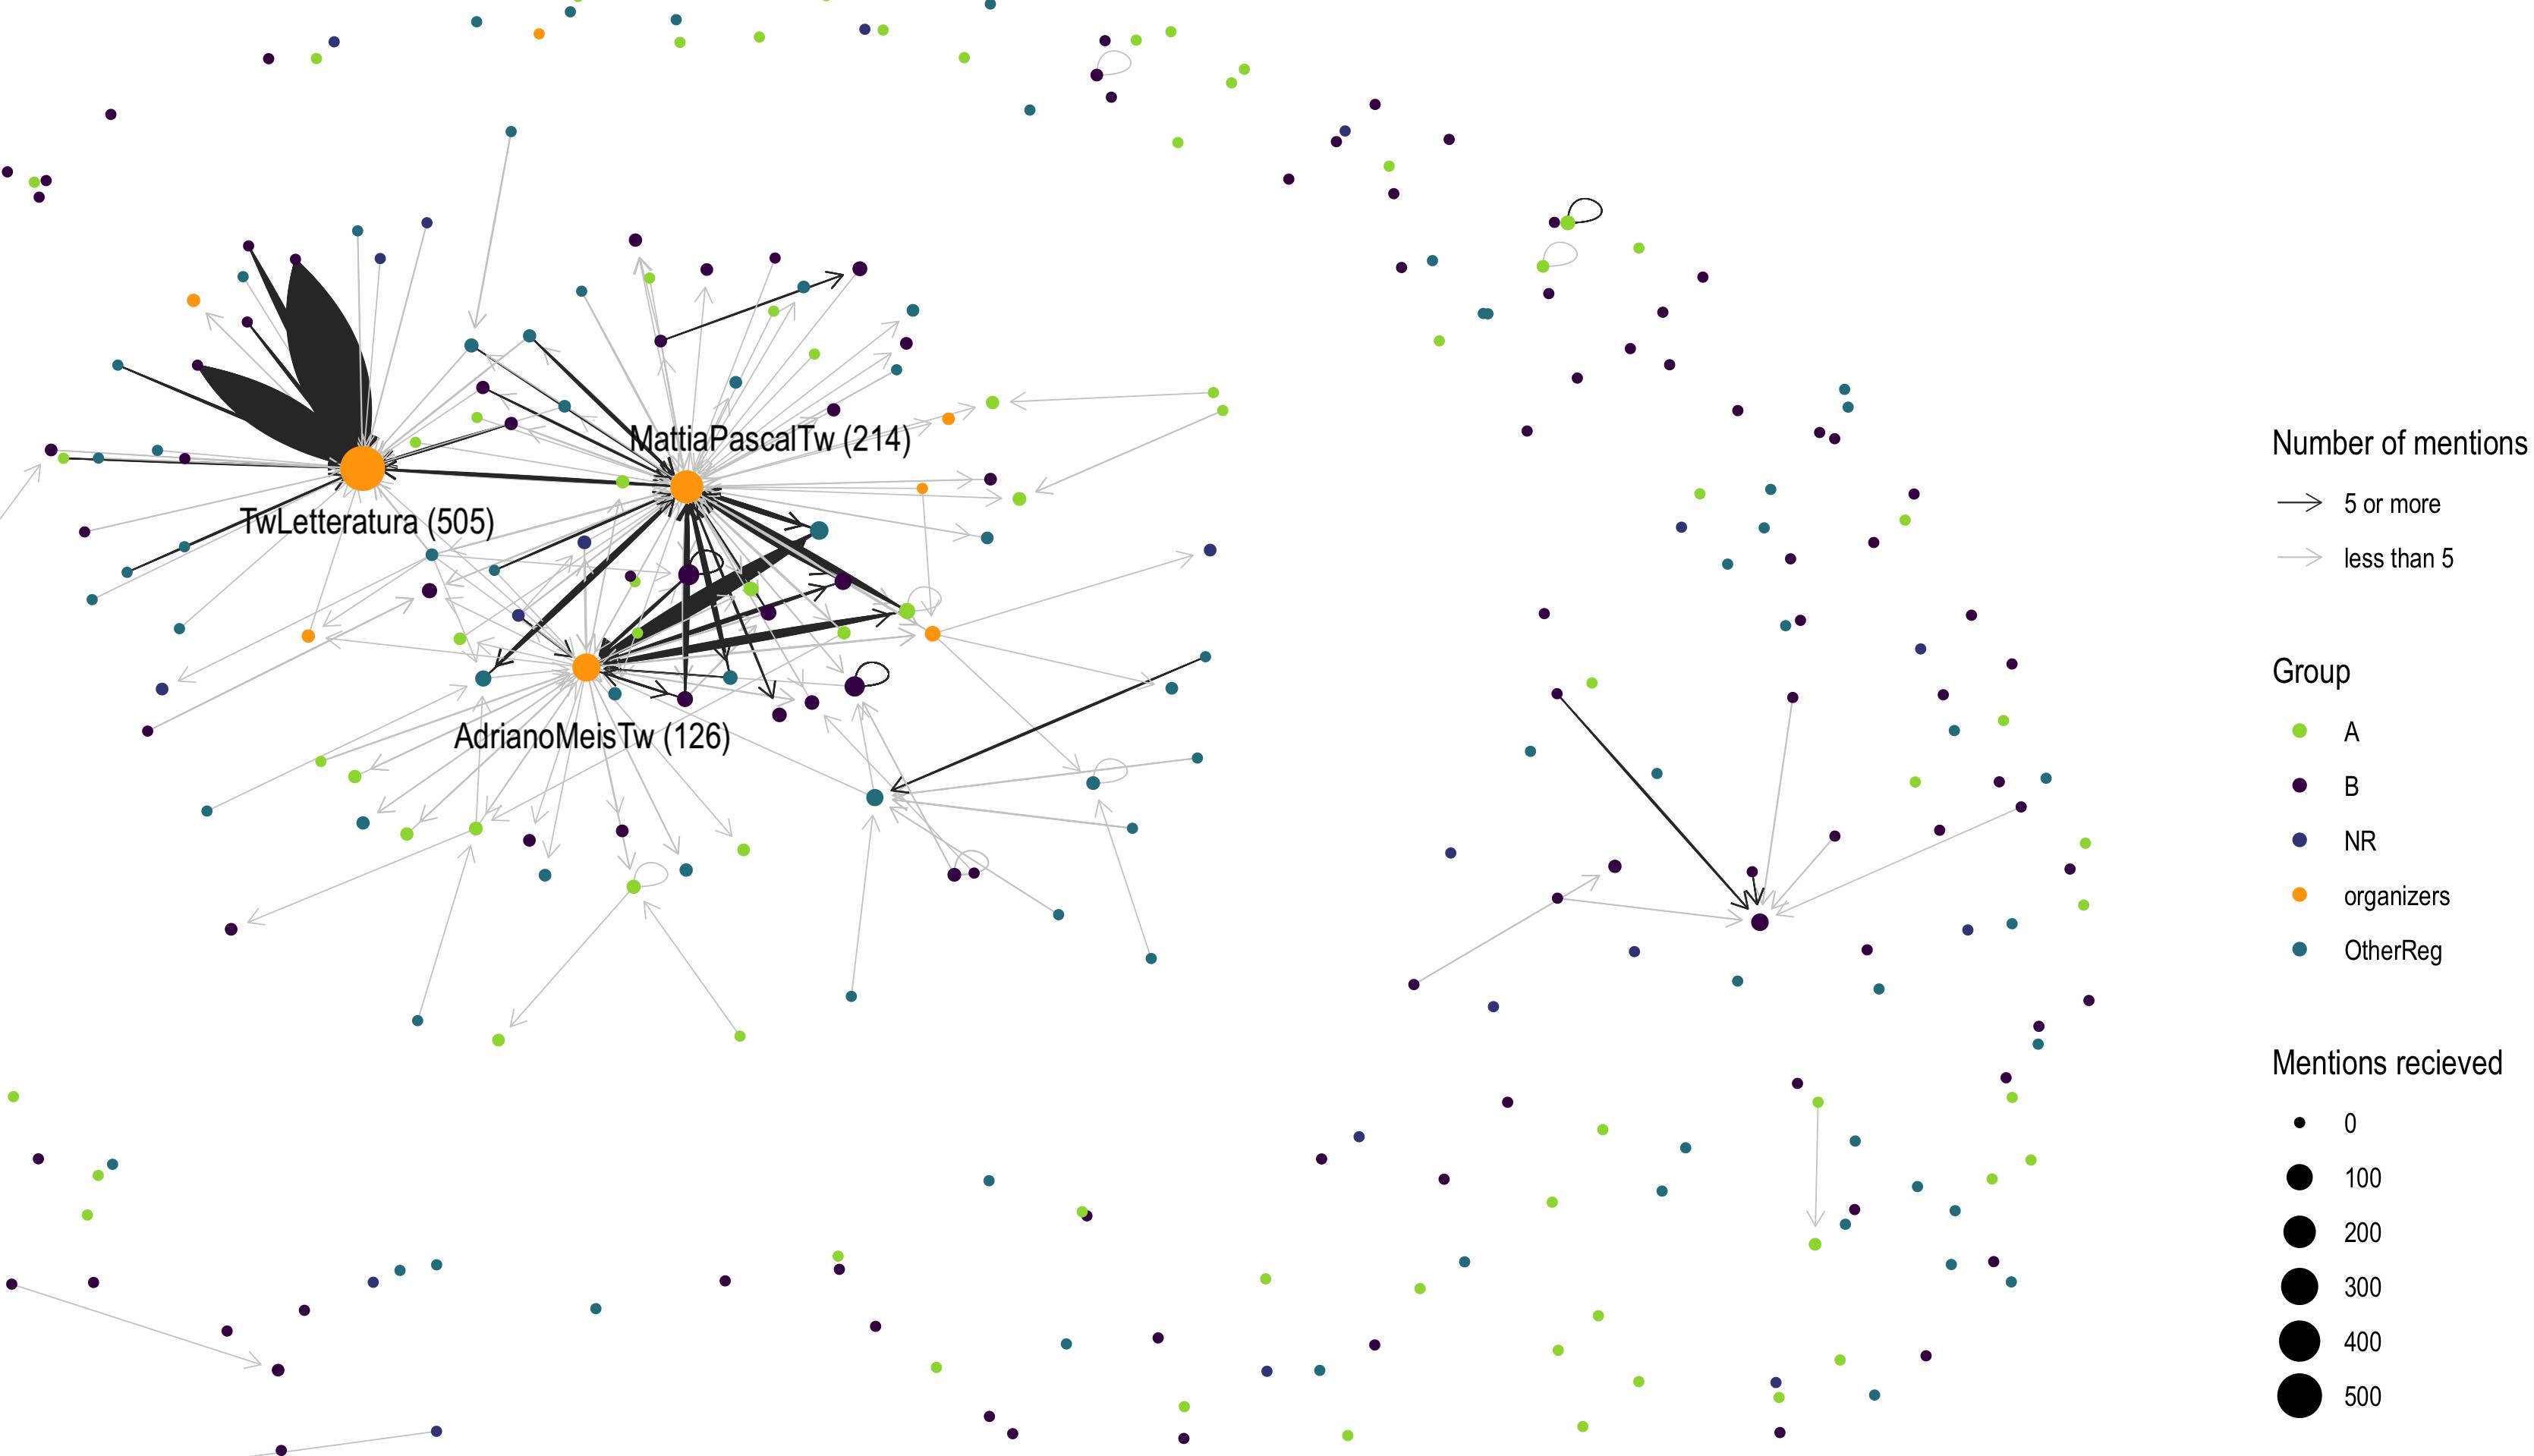 Network graph of mentions of other Twitter users